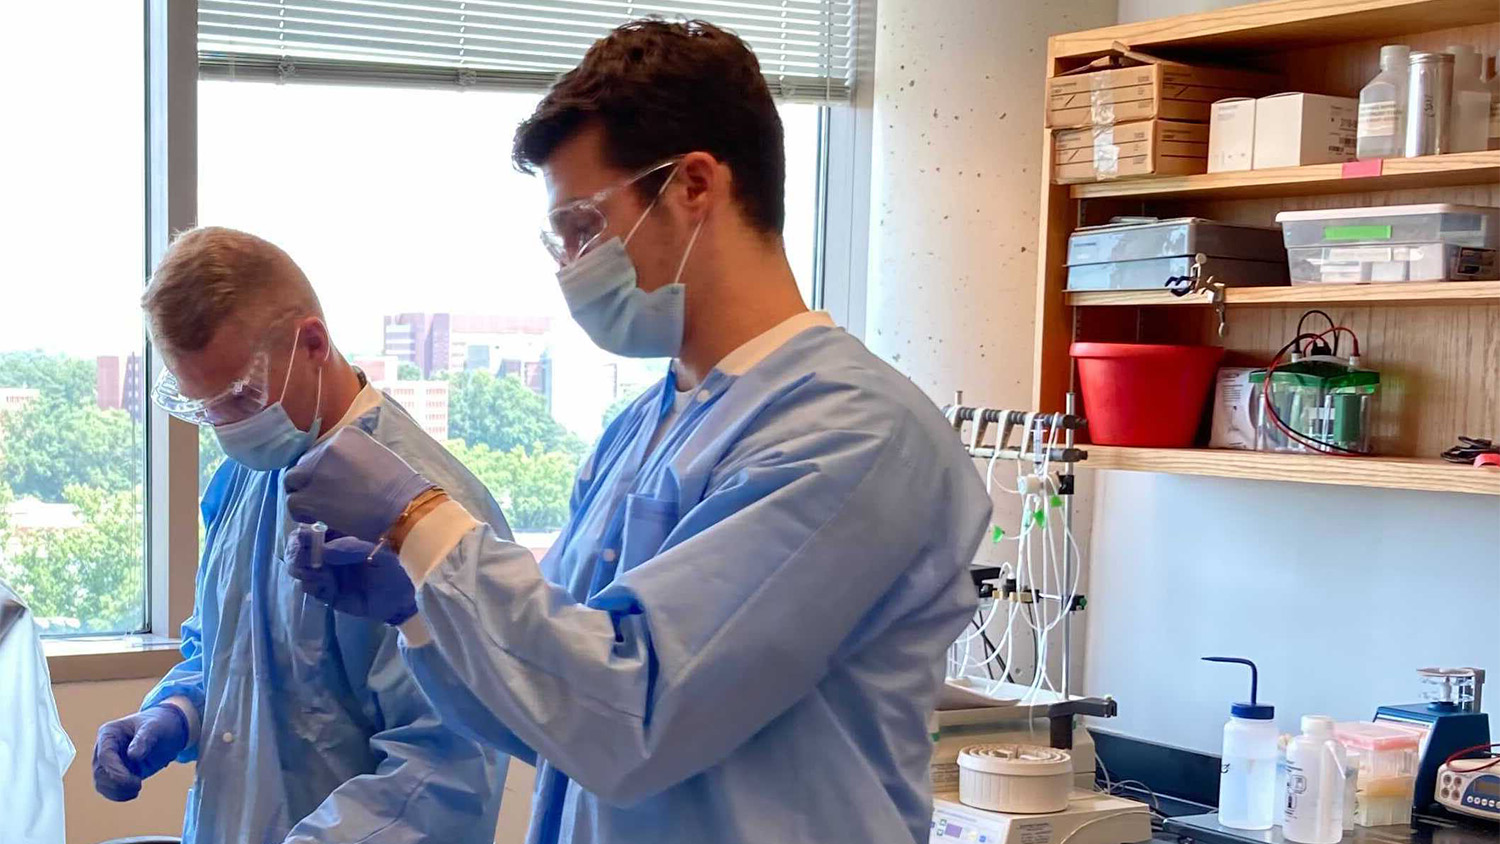 A young man wearing protective lab gear in a lab